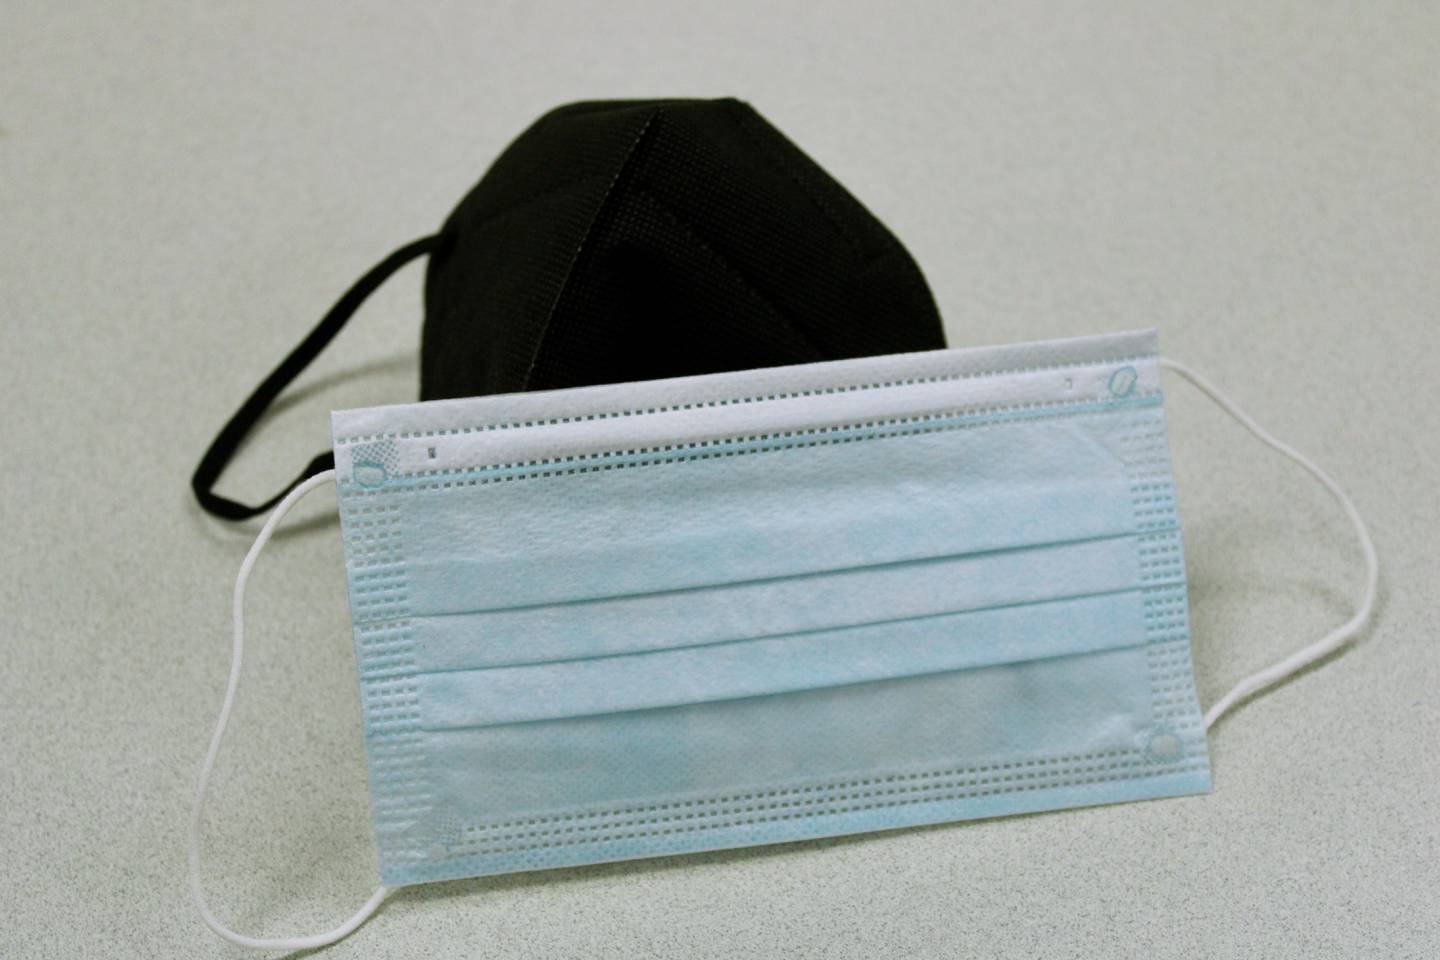 A KN95 black mask and a blue surgical style mask. The Lee County Health Department is recommending masks be worn indoors to prevent close contact infections, citing a rise of COVID-19 cases.